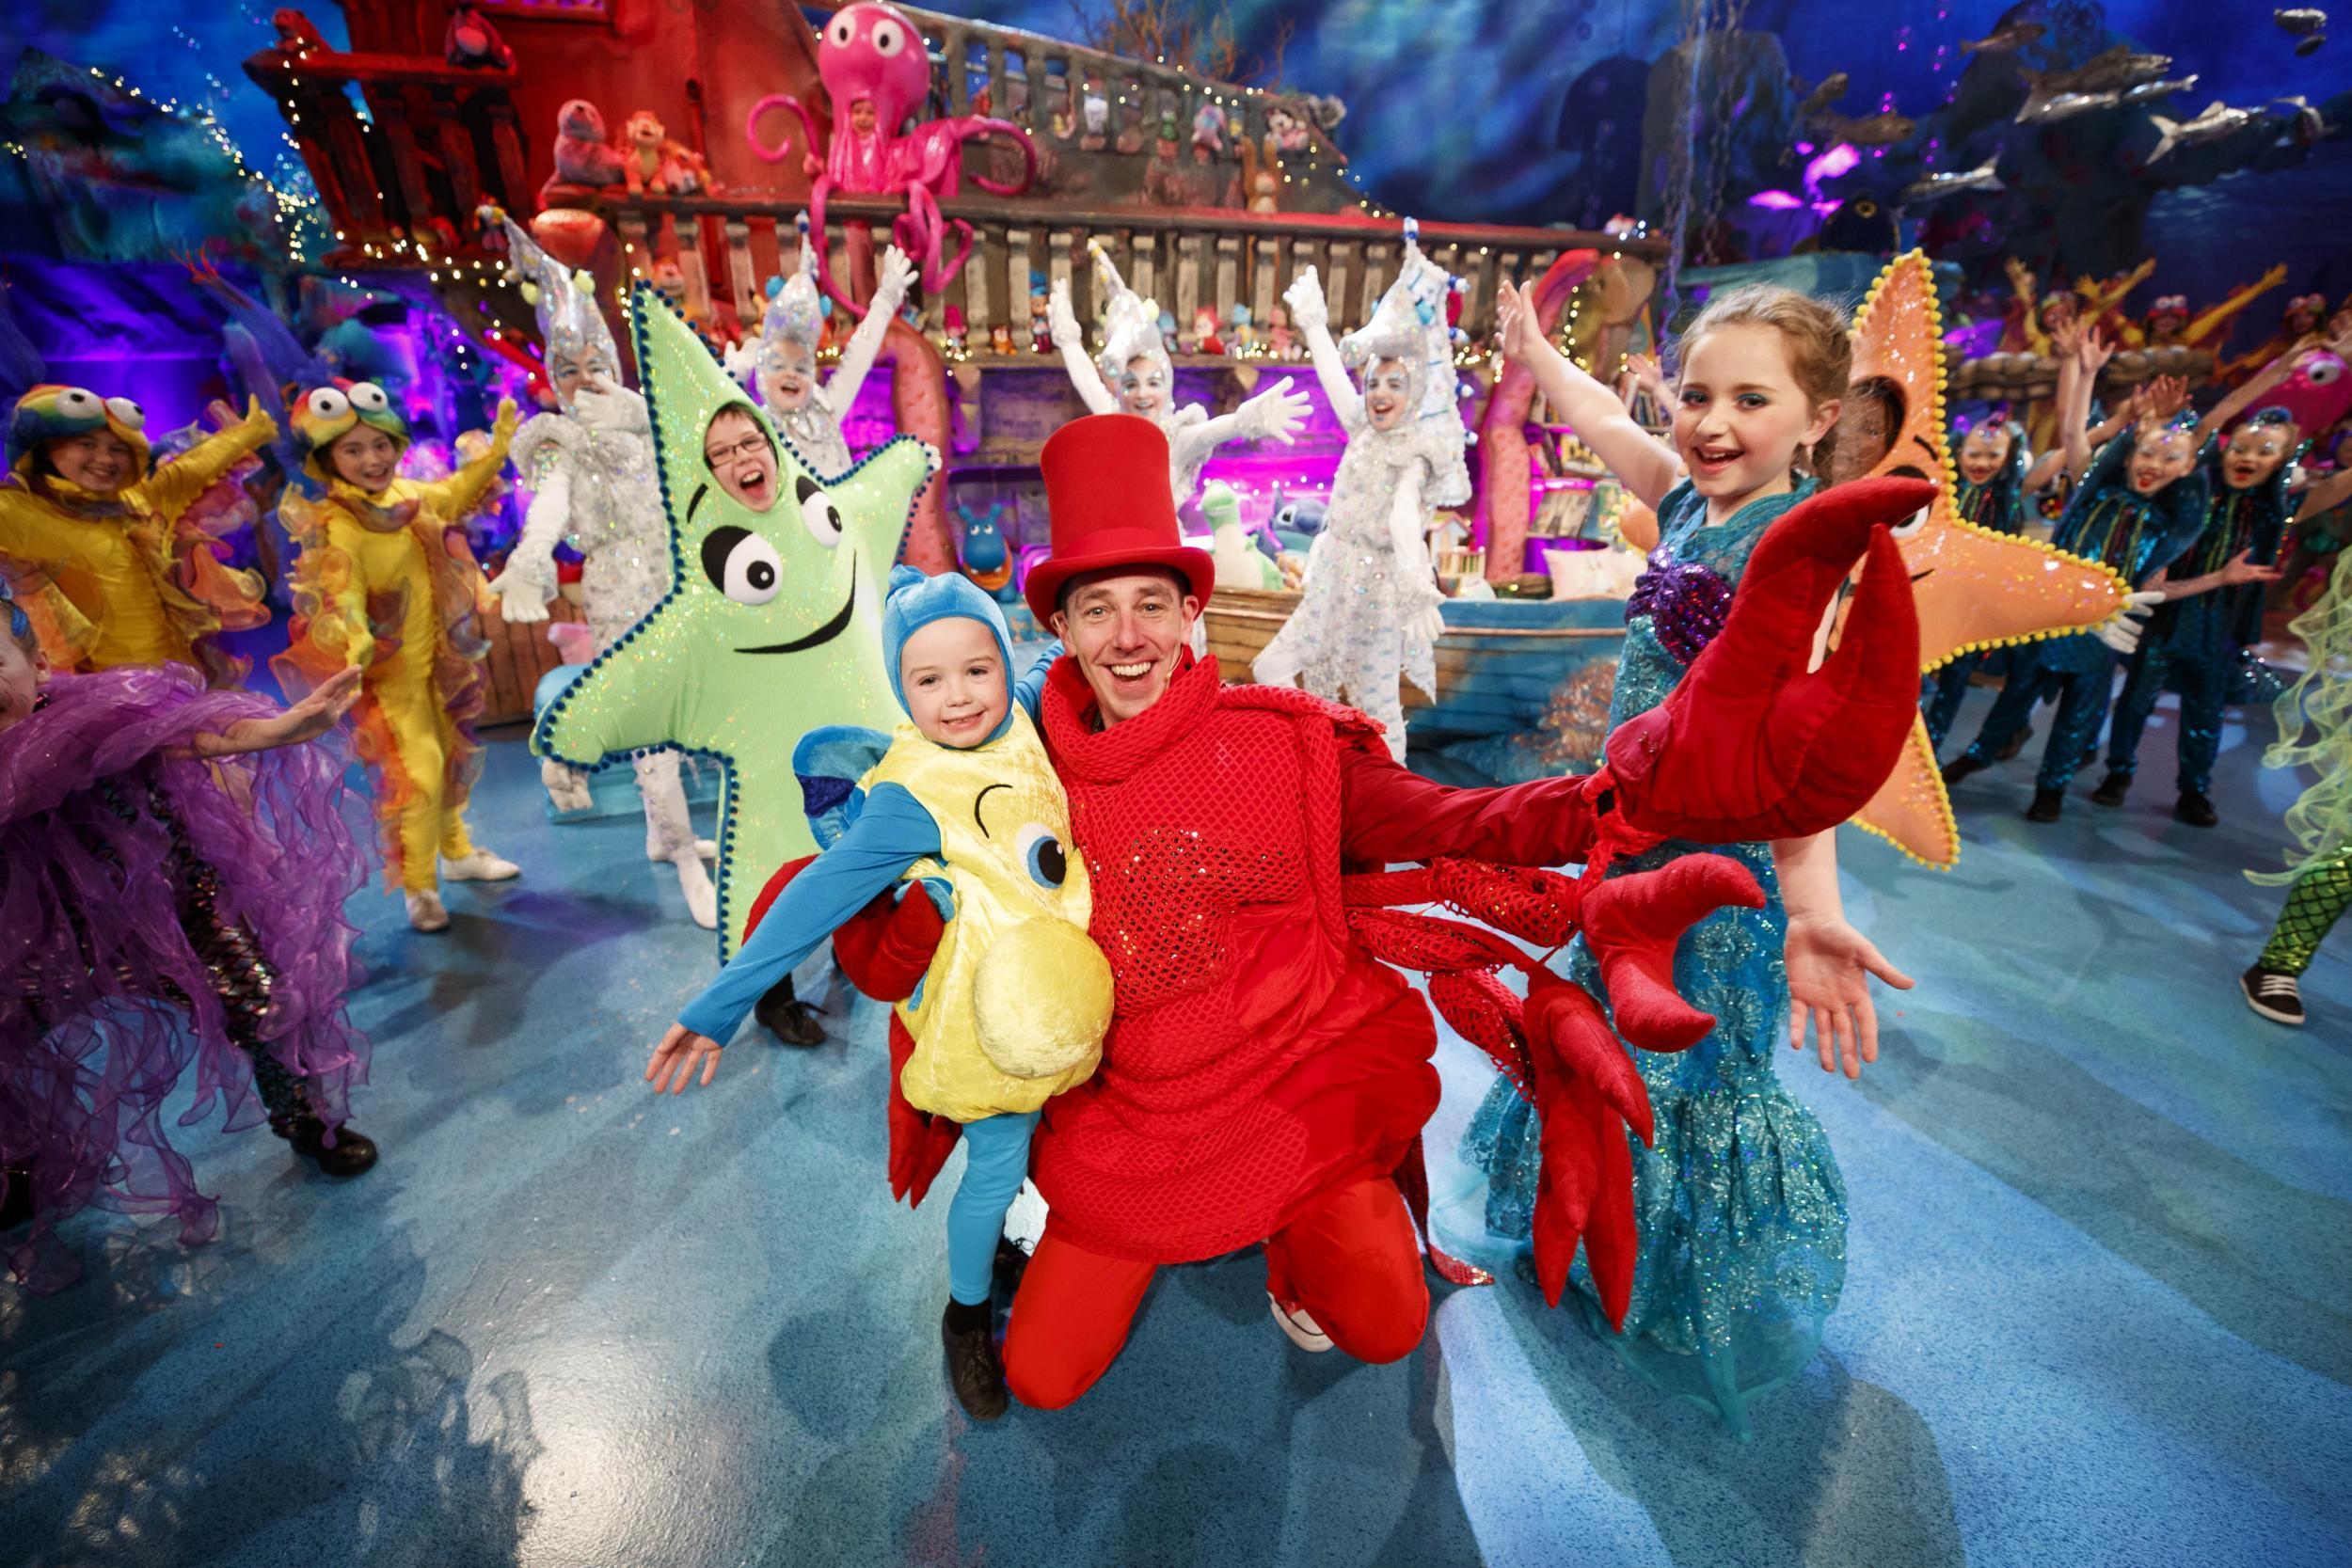 Ryan Tubridy hosting The Late Late Toy Show, with a Little Mermaid theme in 2017